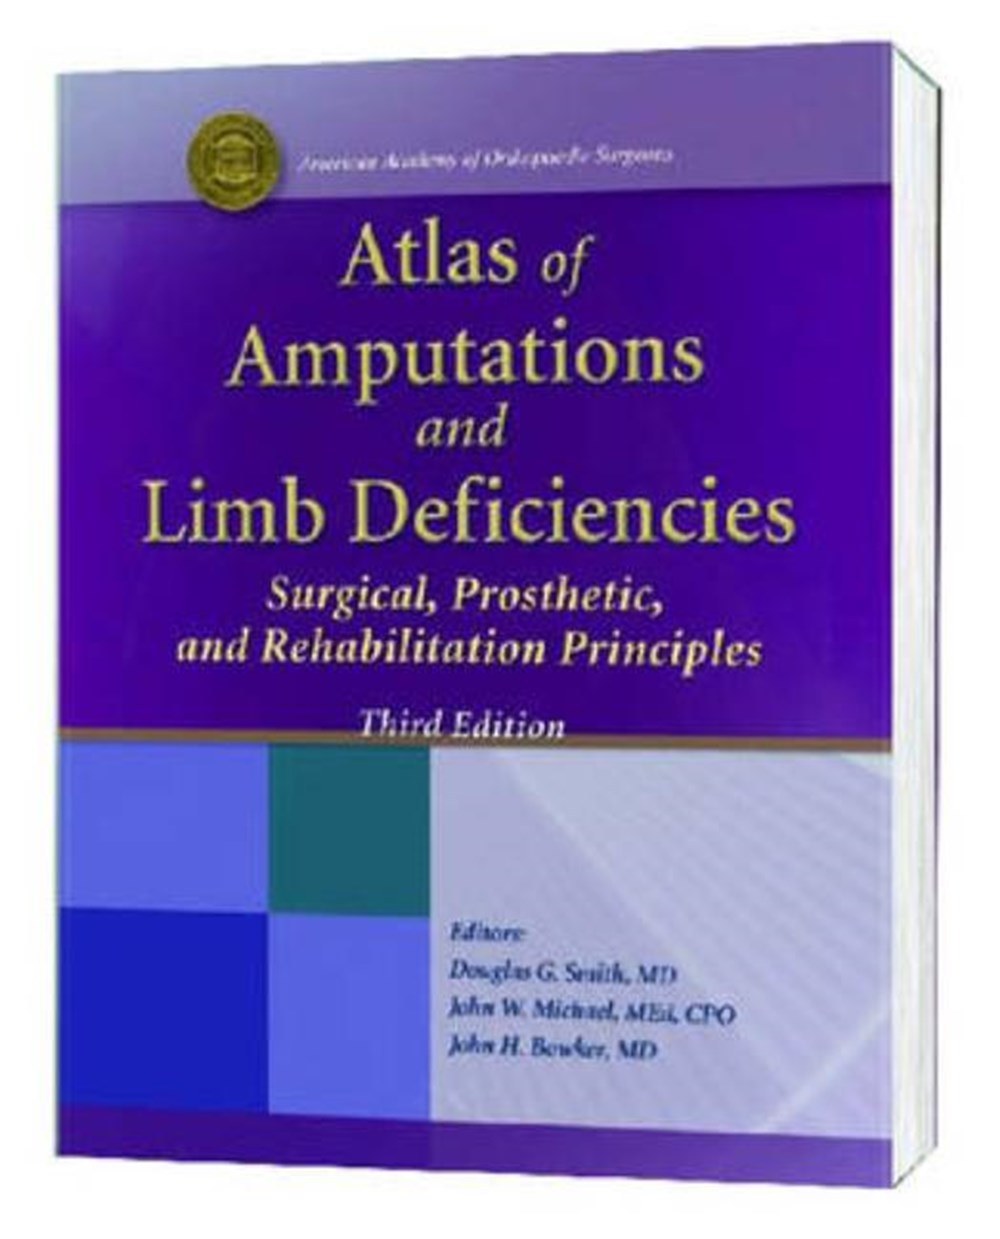 Atlas of Amputations and Limb Deficiencies: Surgical, Prosthetic and Rehabilitation Principles (Revi